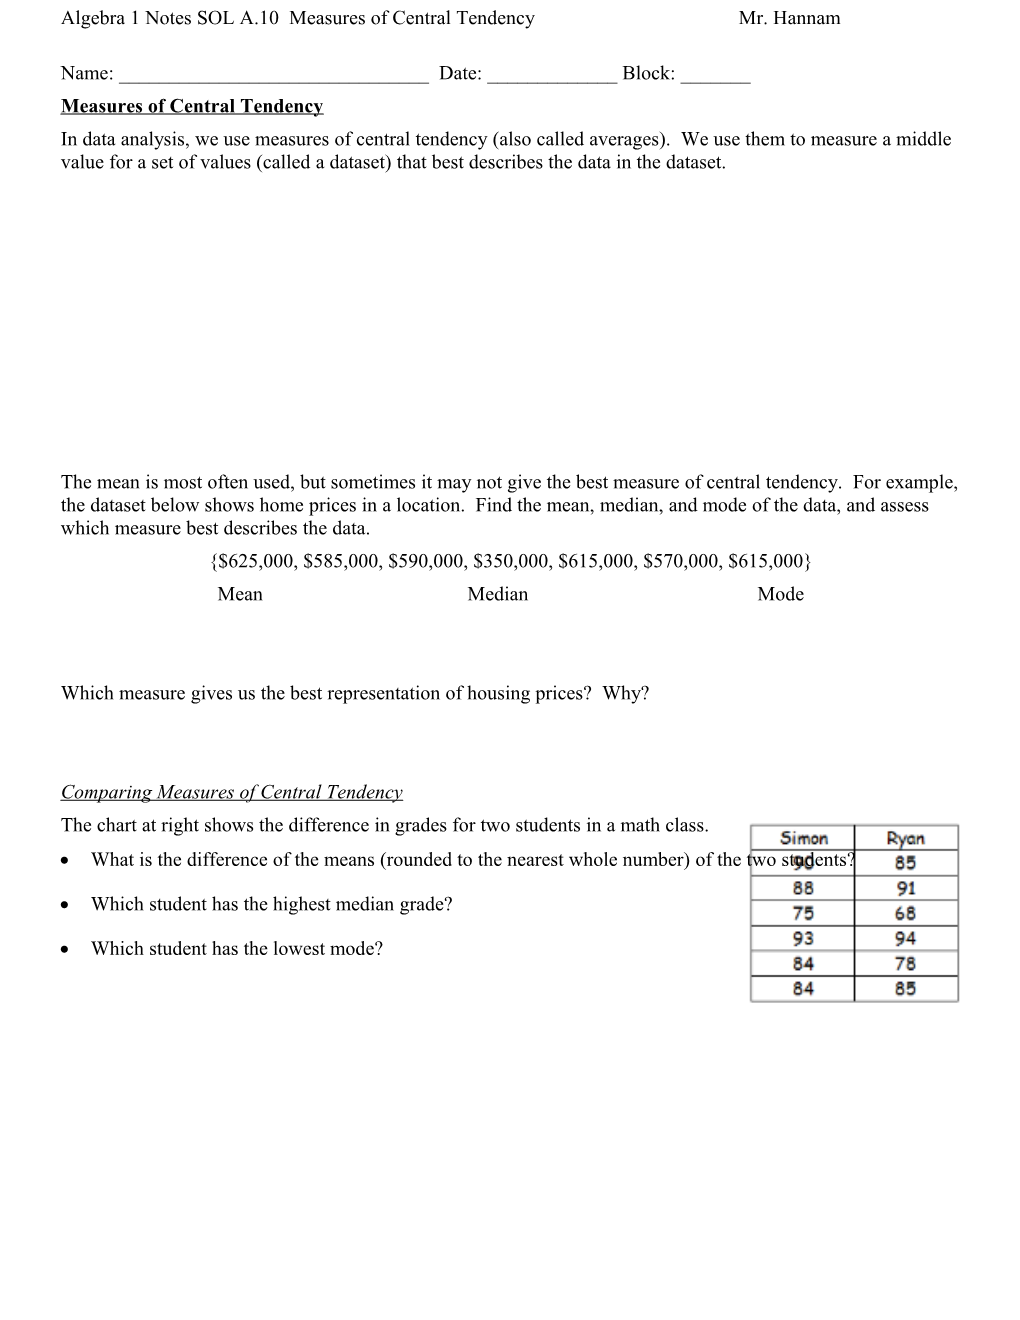 Algebra 1 Notes SOL A.10 Measures of Central Tendency Mr. Hannam Page 1